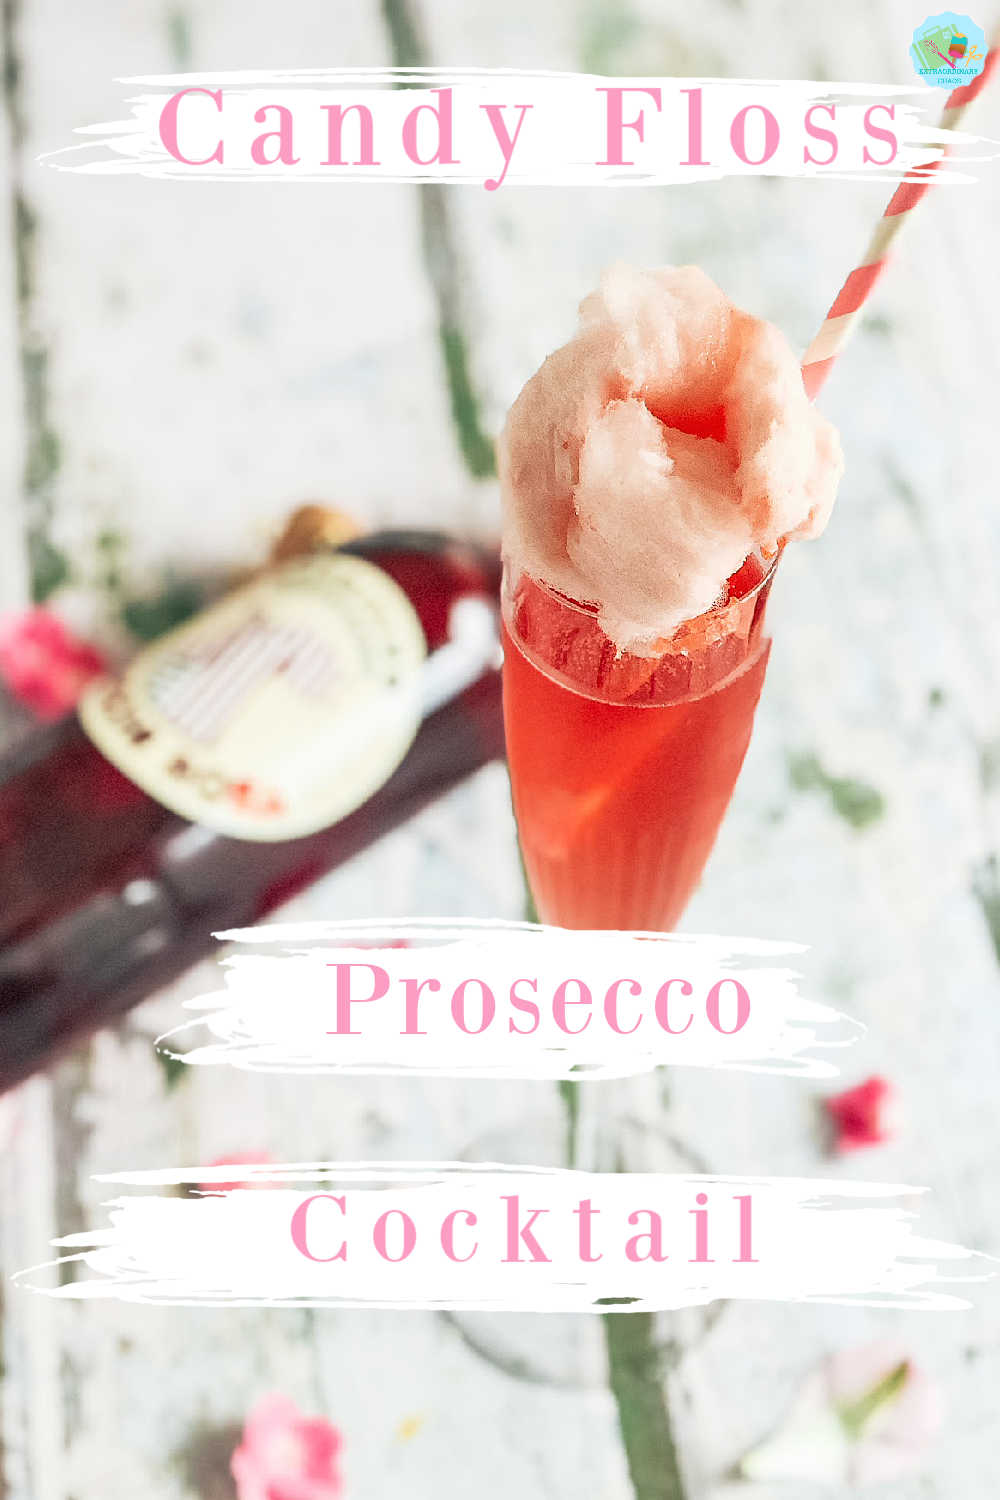 How to make a candy floss and Prosecco pink cocktail recipe